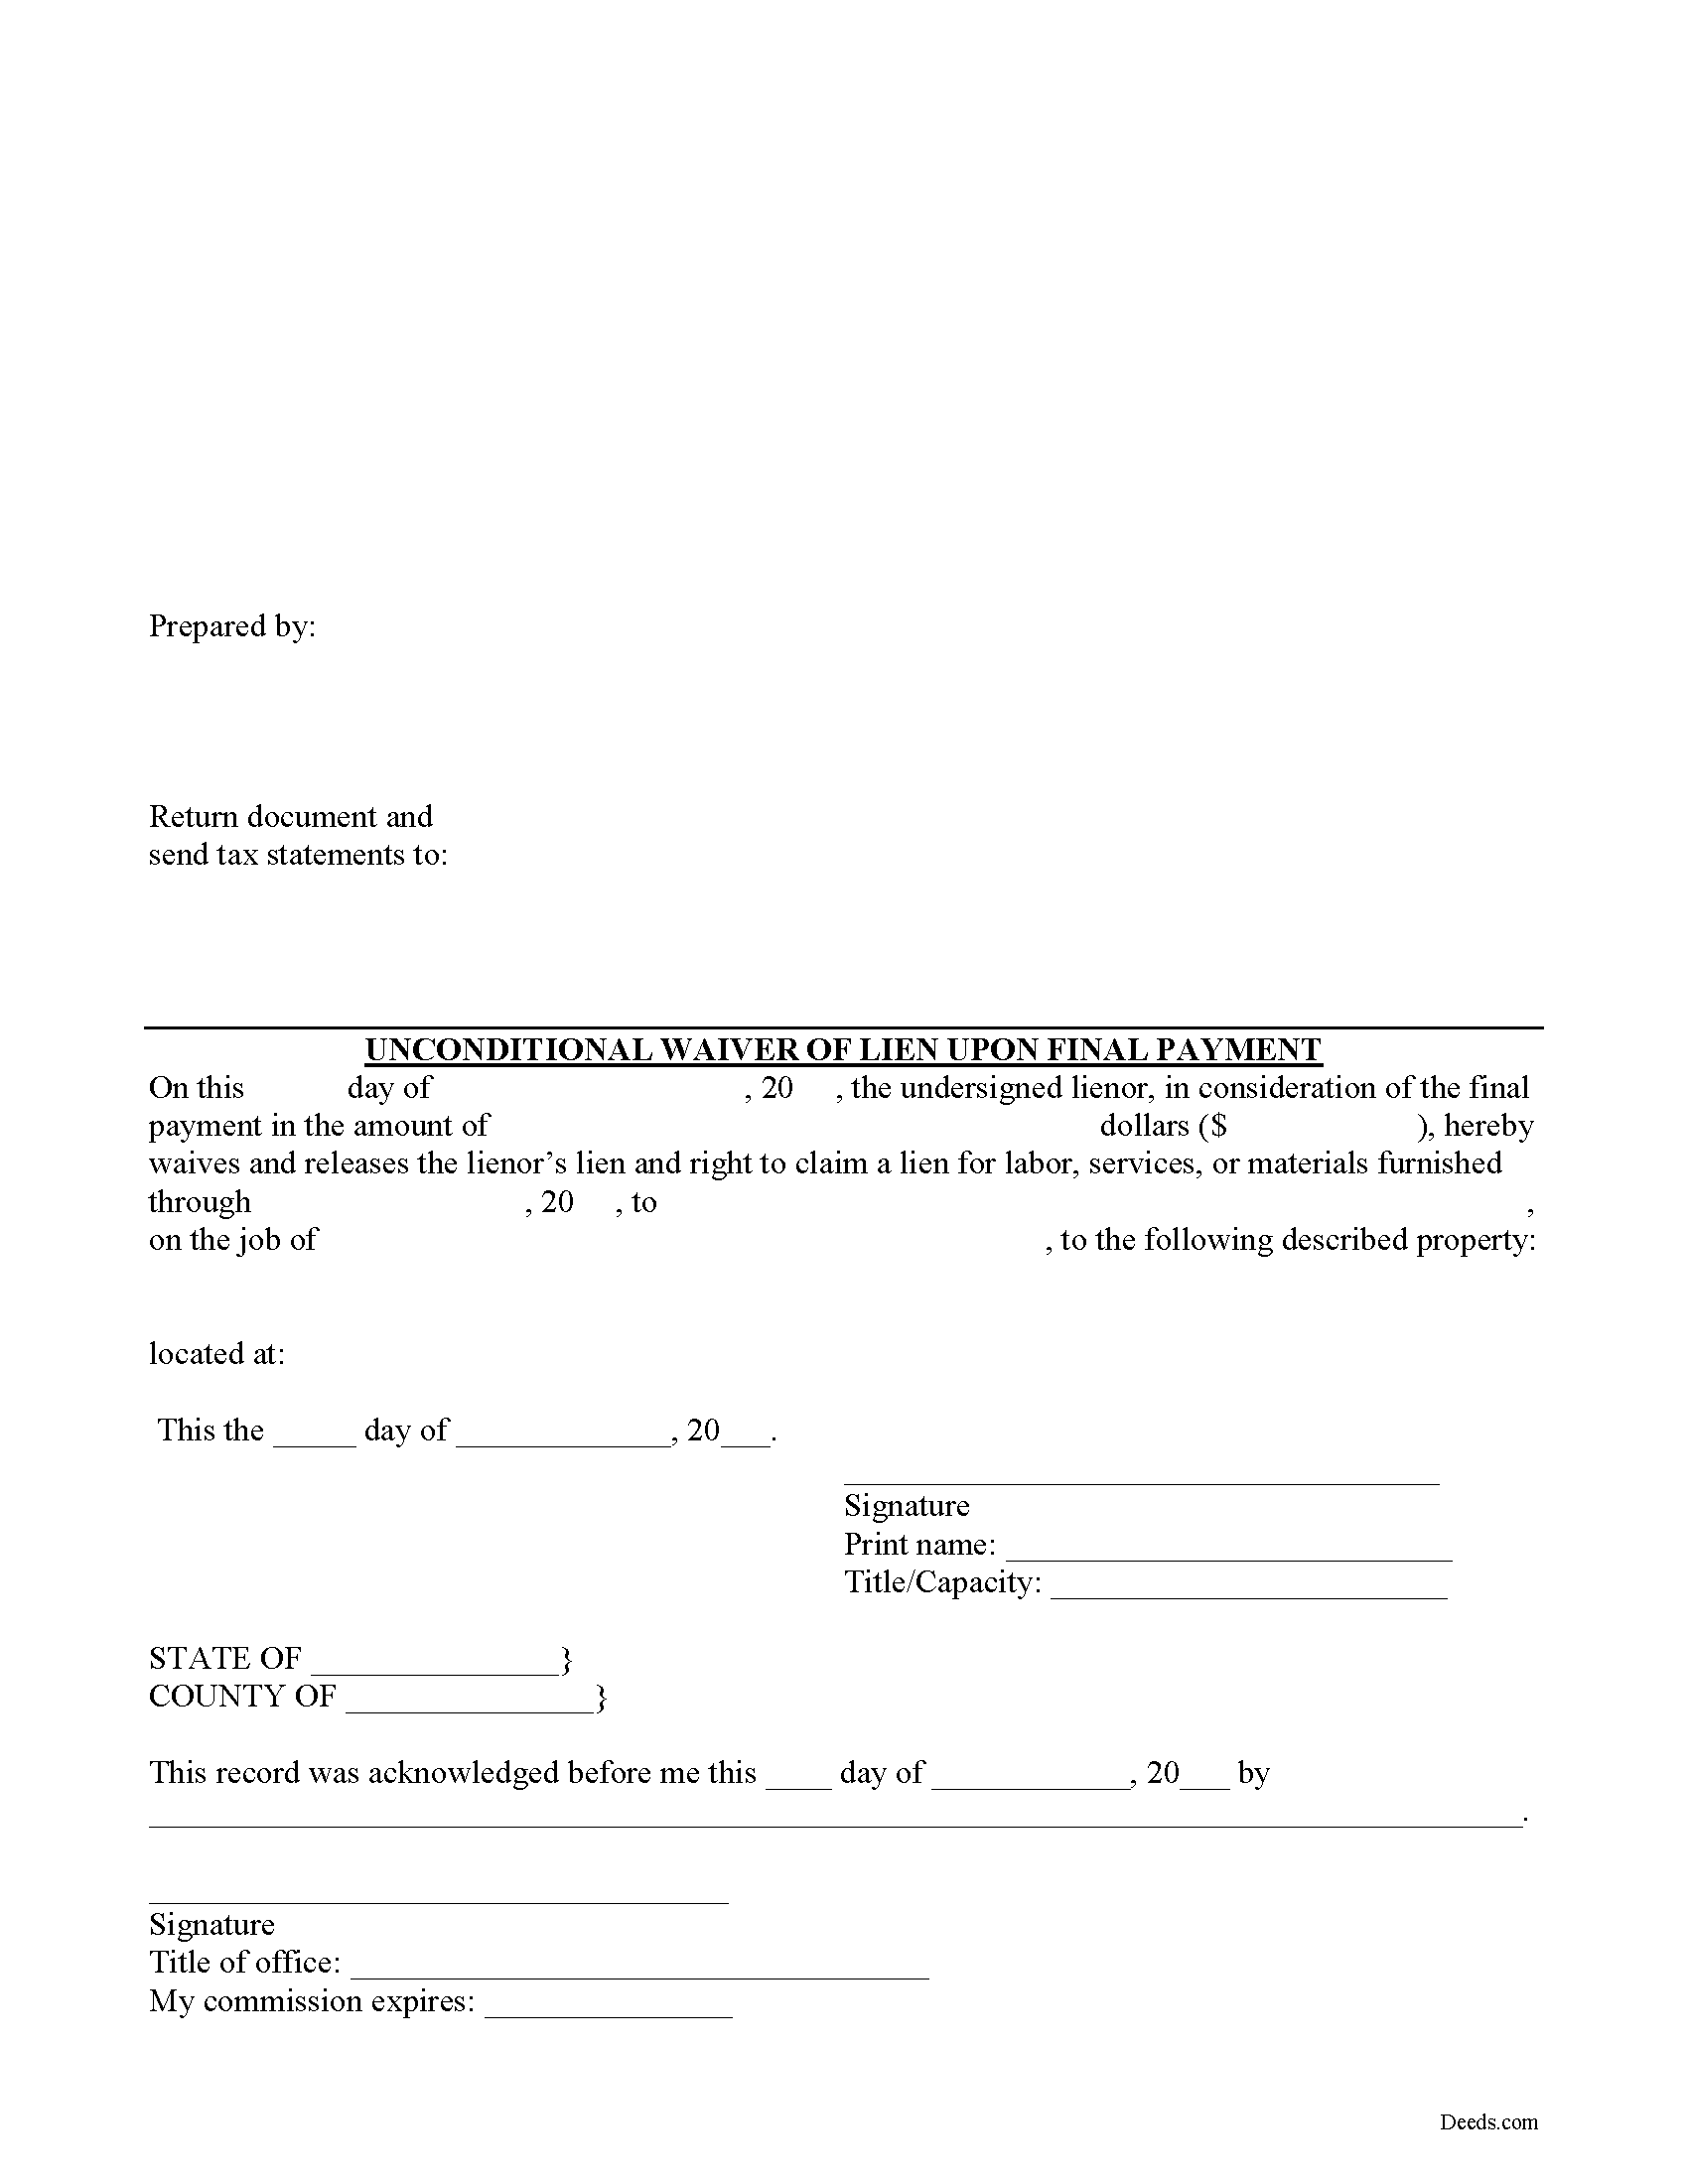 Iowa Unconditional Waiver on Final Payment Image